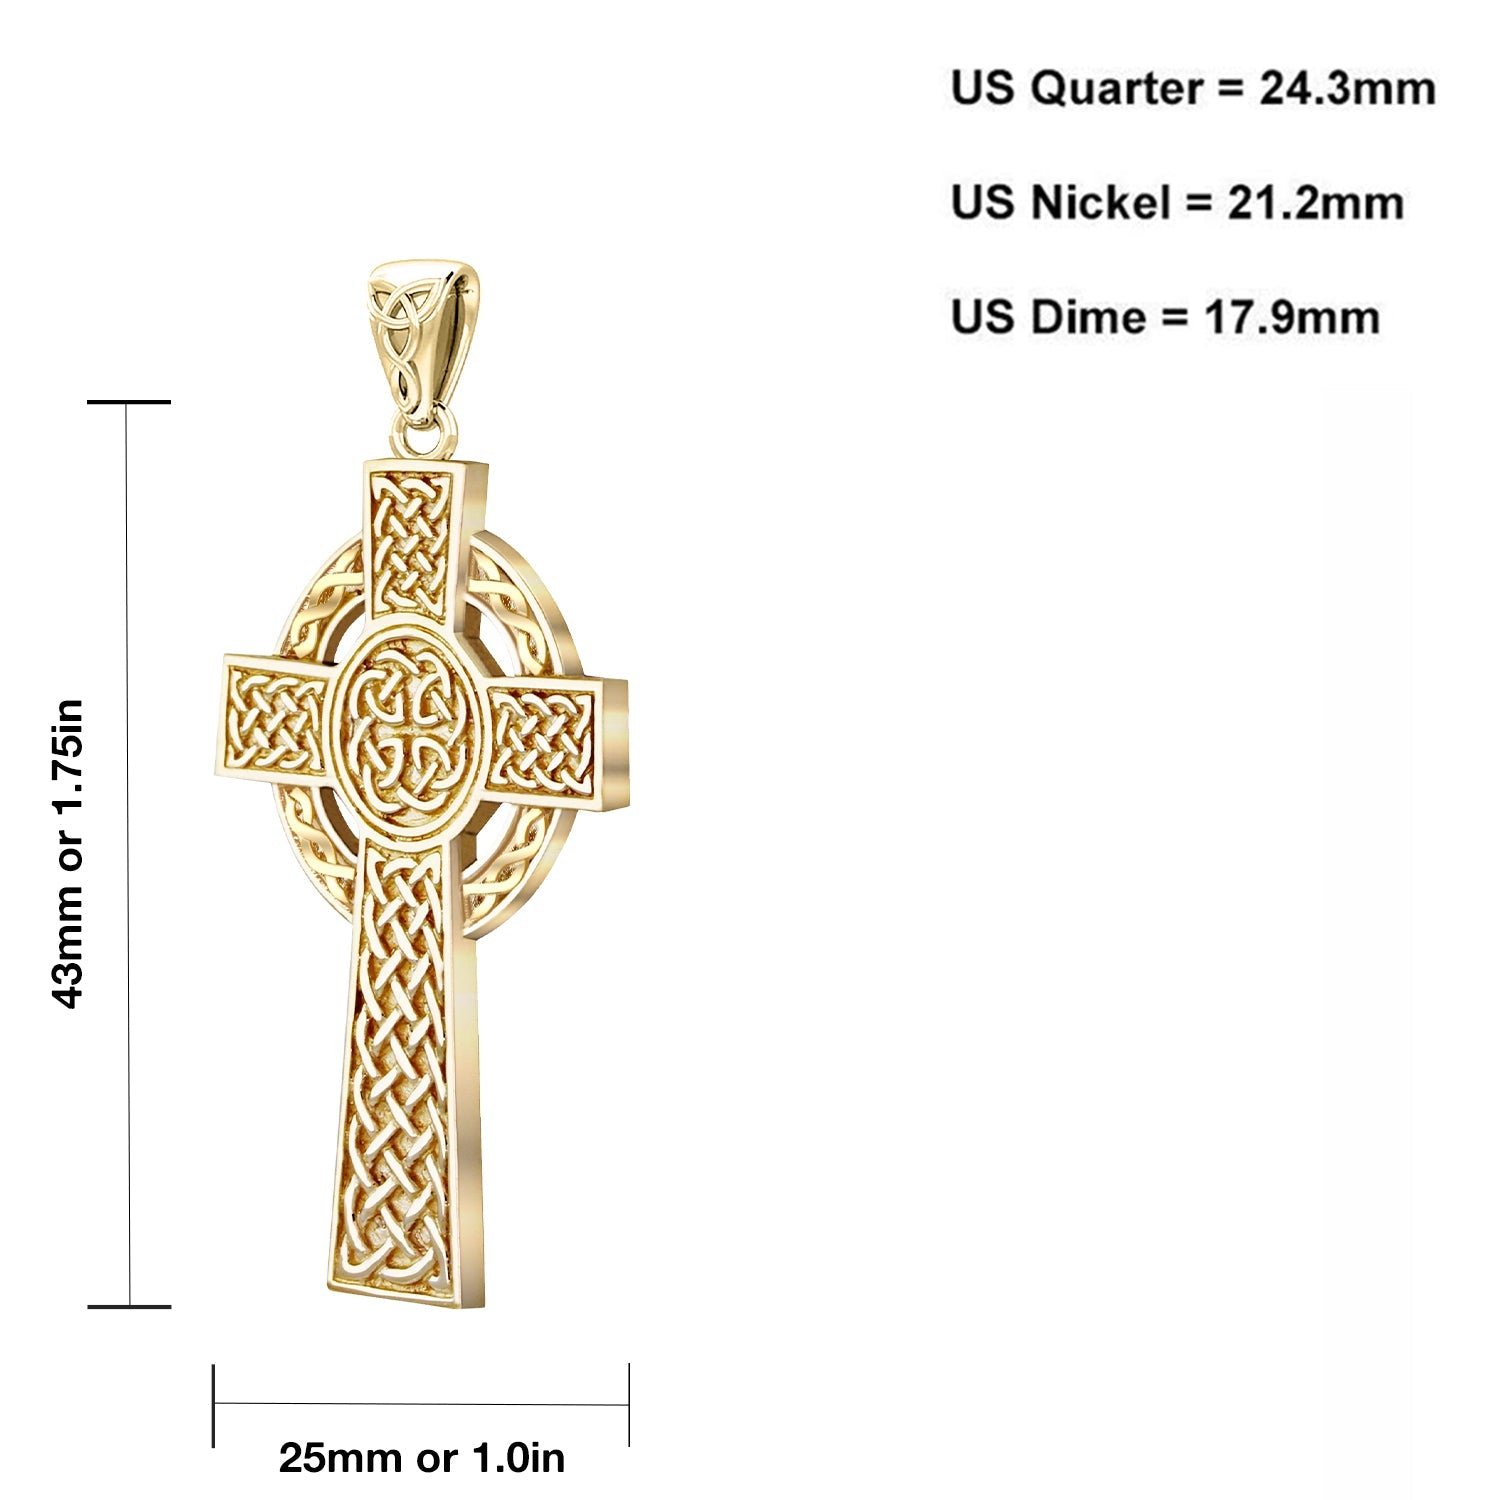 Men's Heavy 11g Solid 14k Yellow Celtic Cross Pendant Necklace, Polished Finish - US Jewels